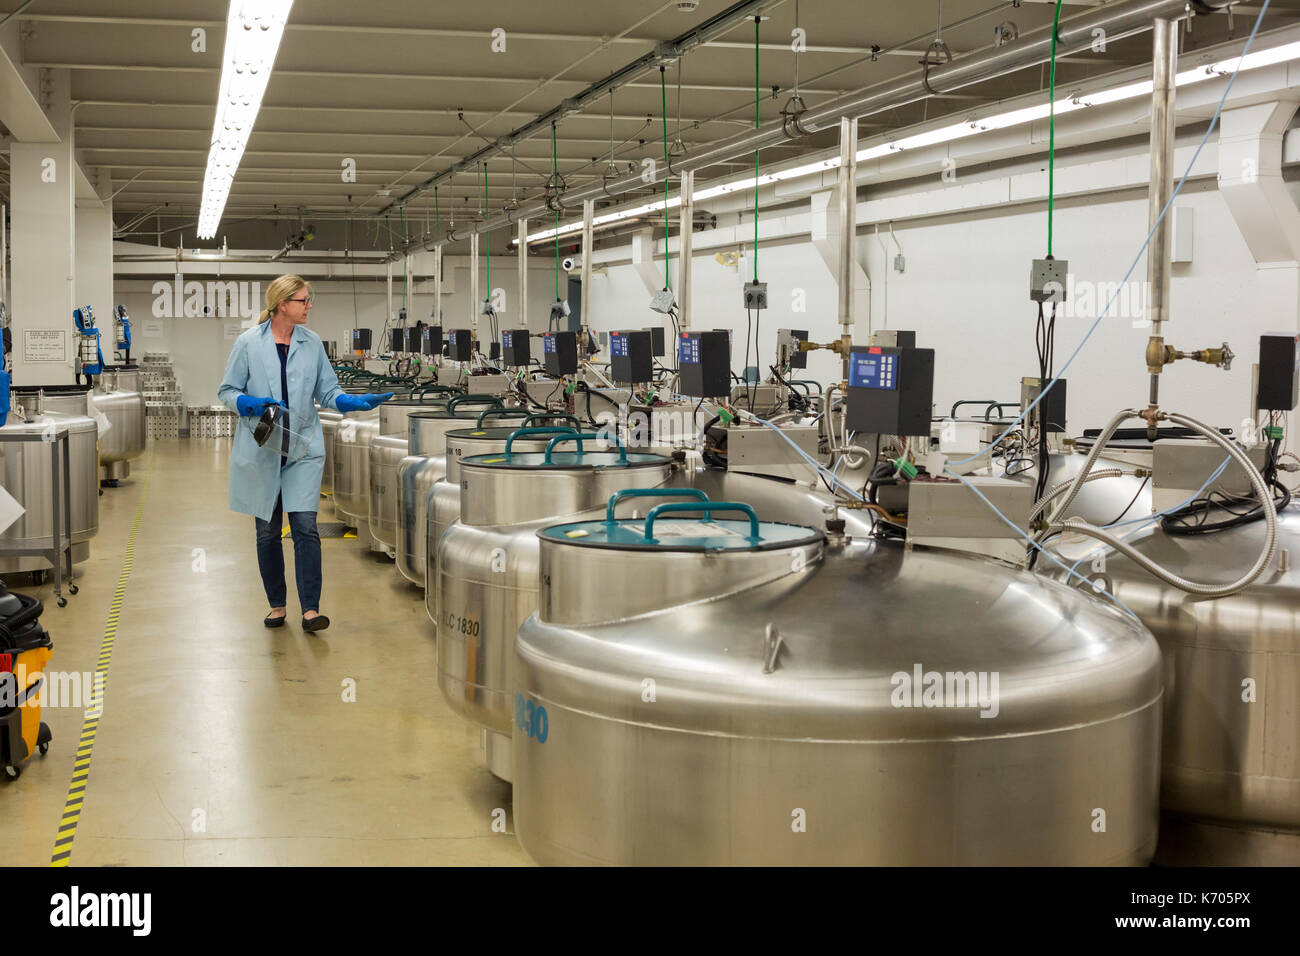 Fort Collins, Colorado - Amy Gurza, a biological science technician, walks past tanks of liquid nitrogen that store seeds, sperm, and other germplasm  Stock Photo